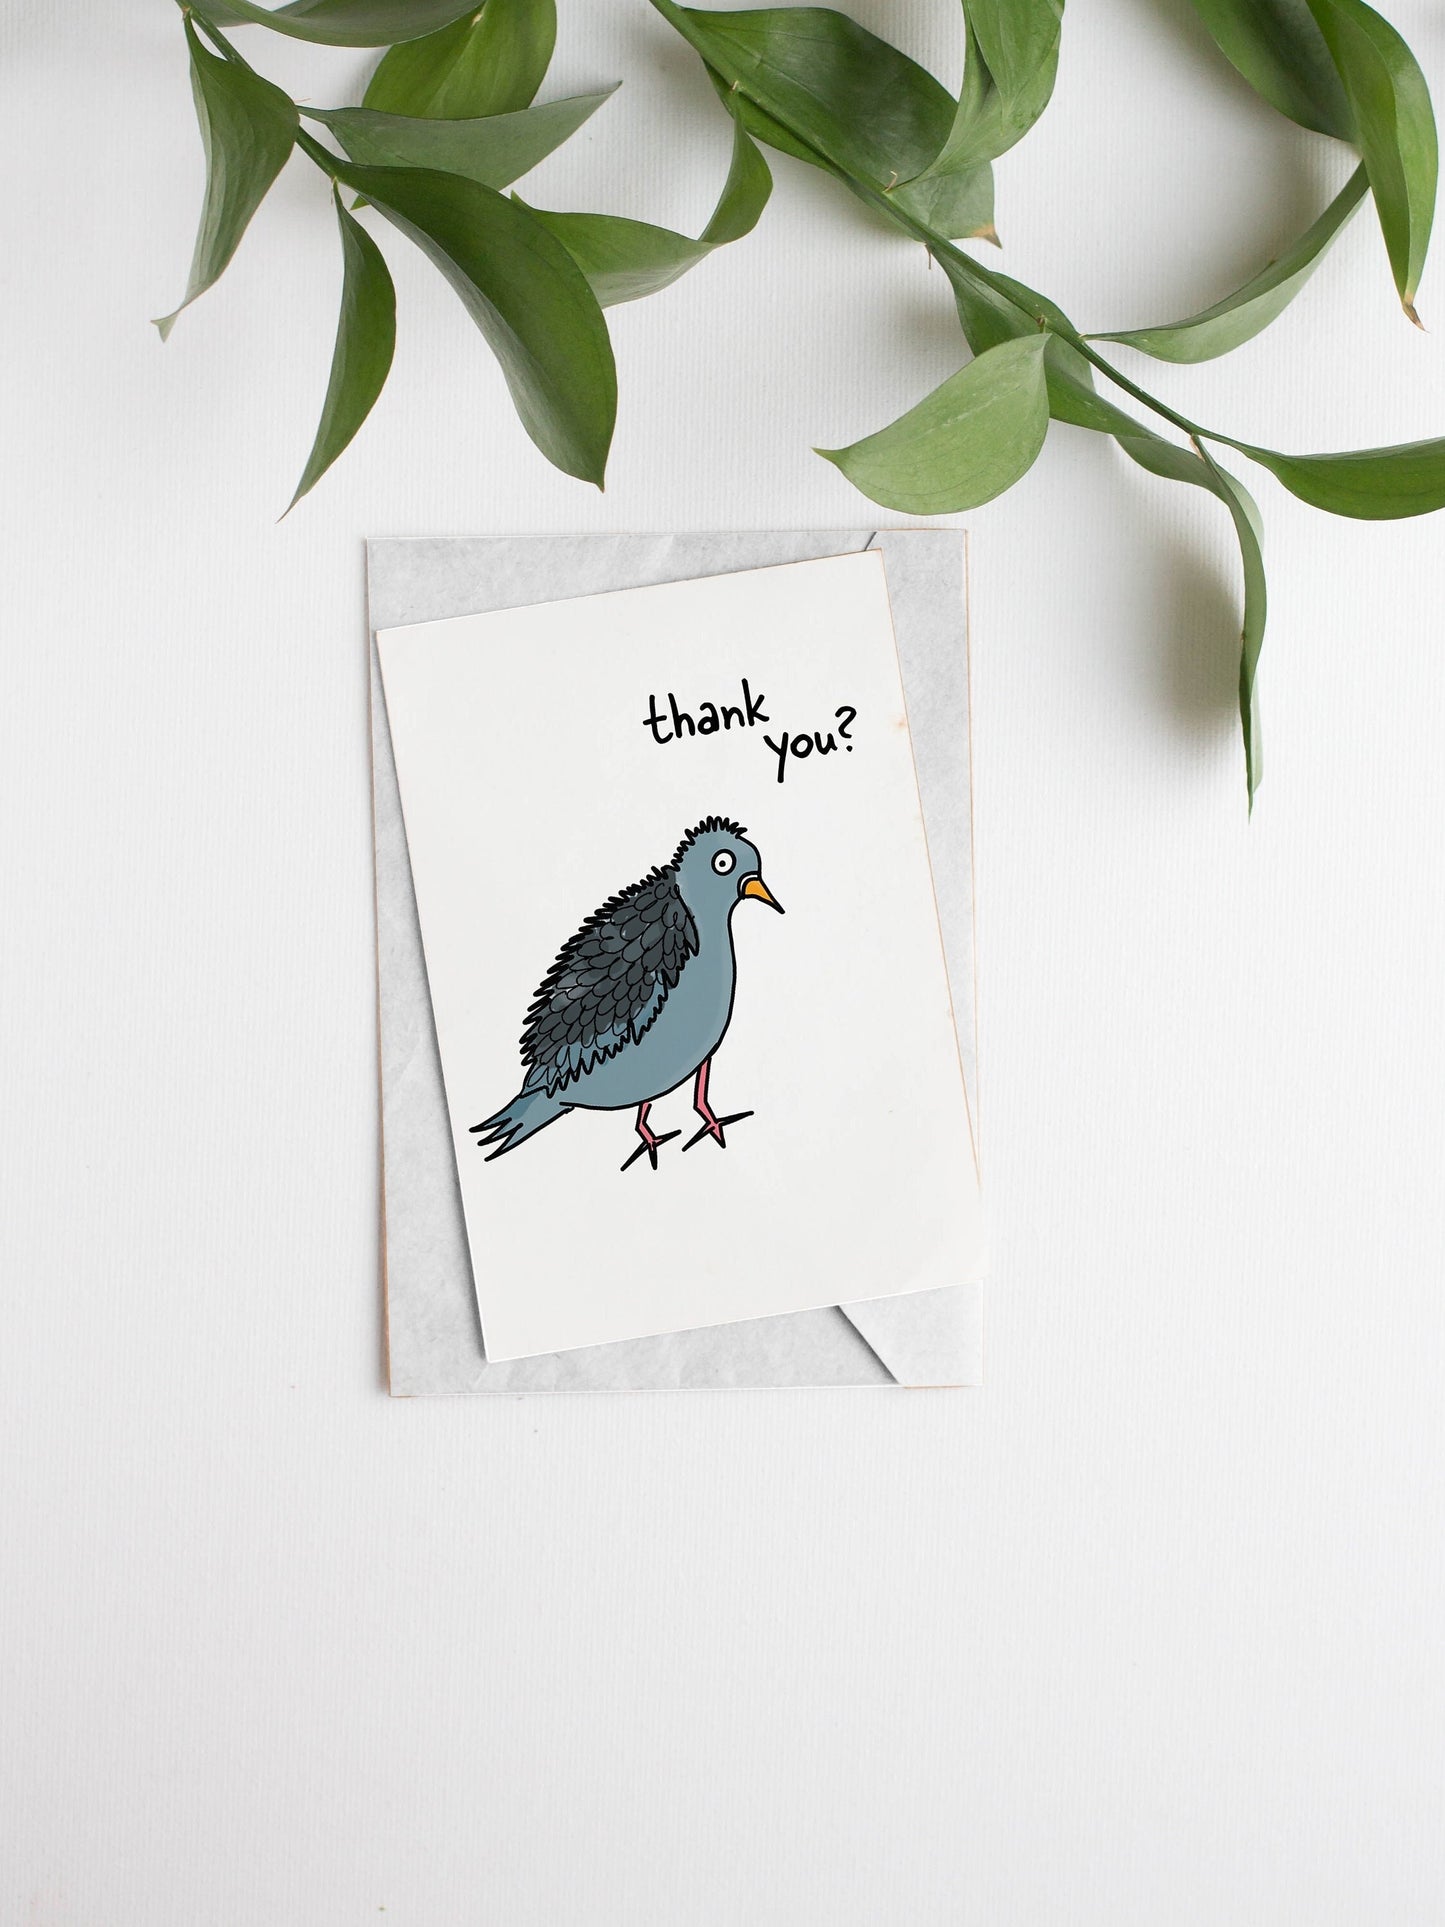 Thank You Card, Confused Pigeon Card, Quirky Card for Friend, Funny Gift for Birders, Mangy Pigeon Thank You, Cartoon Animal Greeting Card